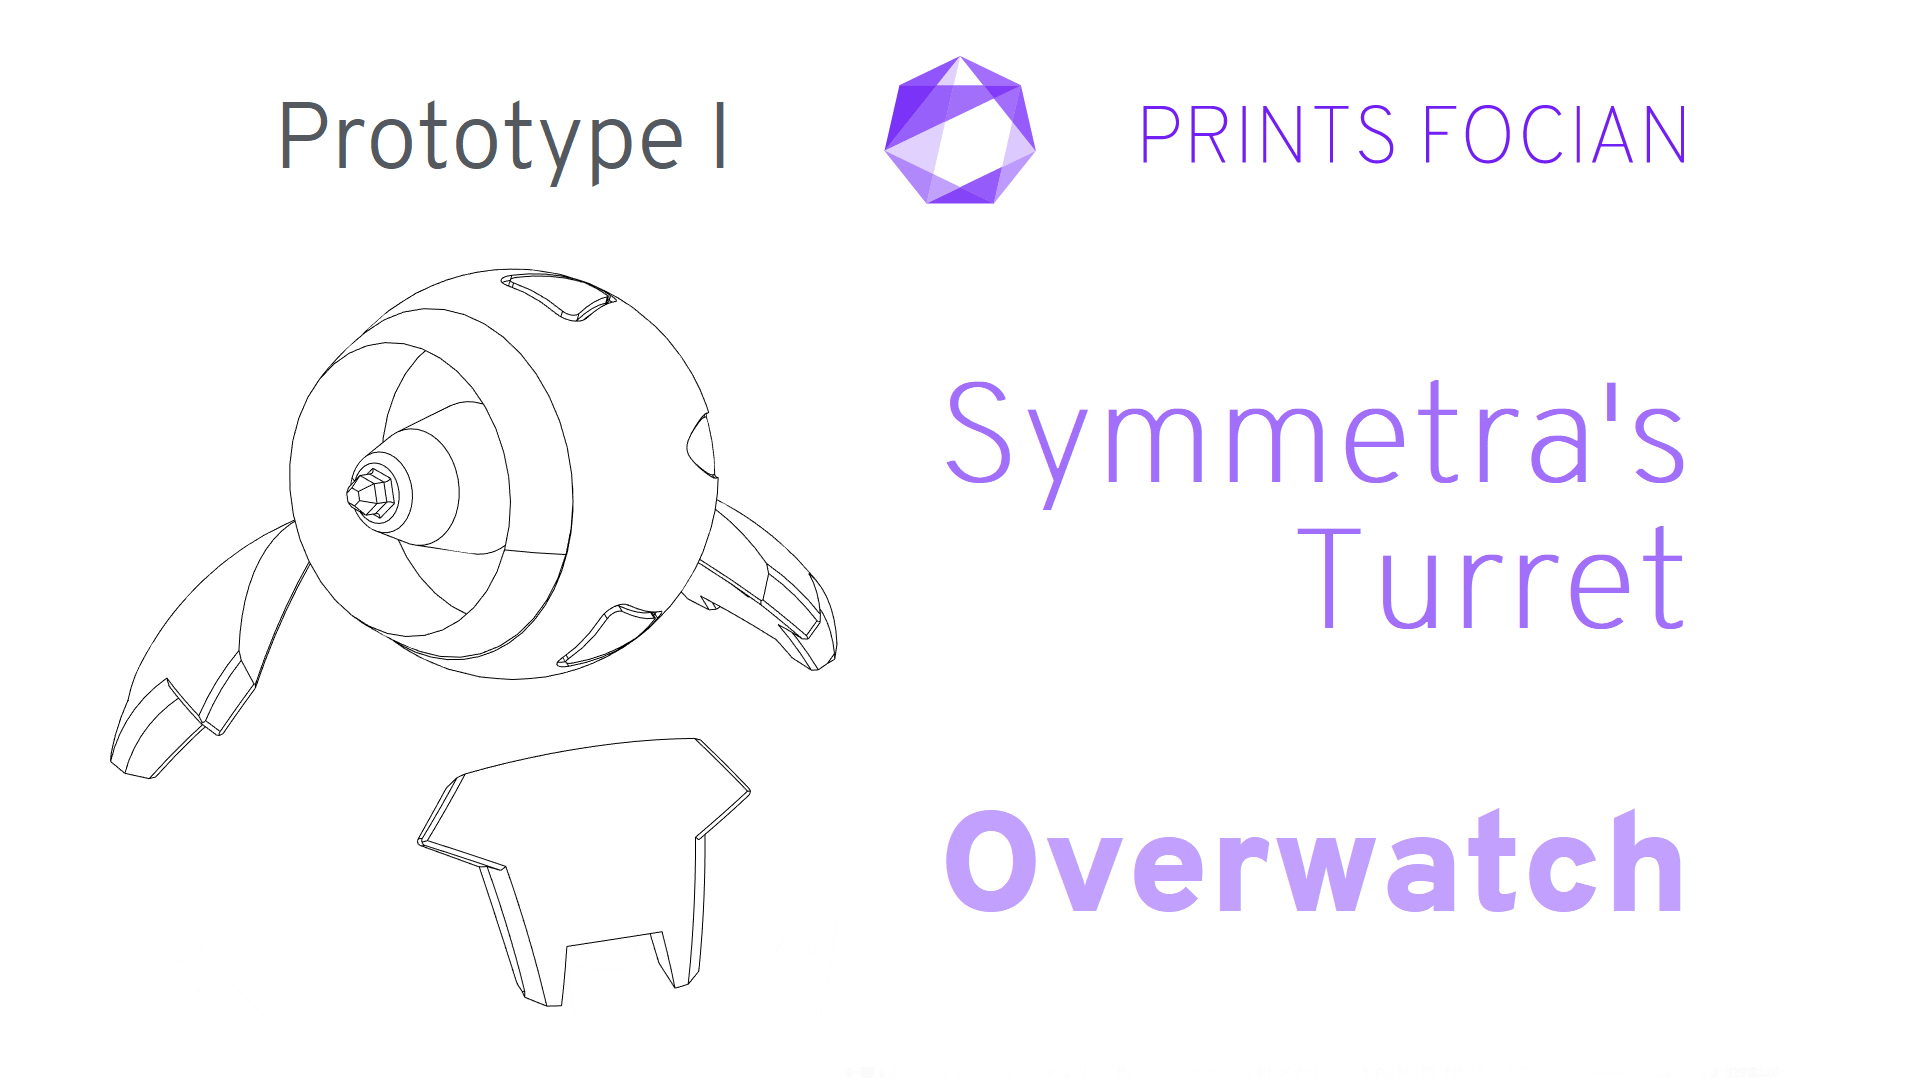 Wireframe image of Symmetra's Turret on a white background. Prints Focian Icon top and central. Text: Purple Prints Focian, Symmetra's Turret, Overwatch and dark grey Prototype I